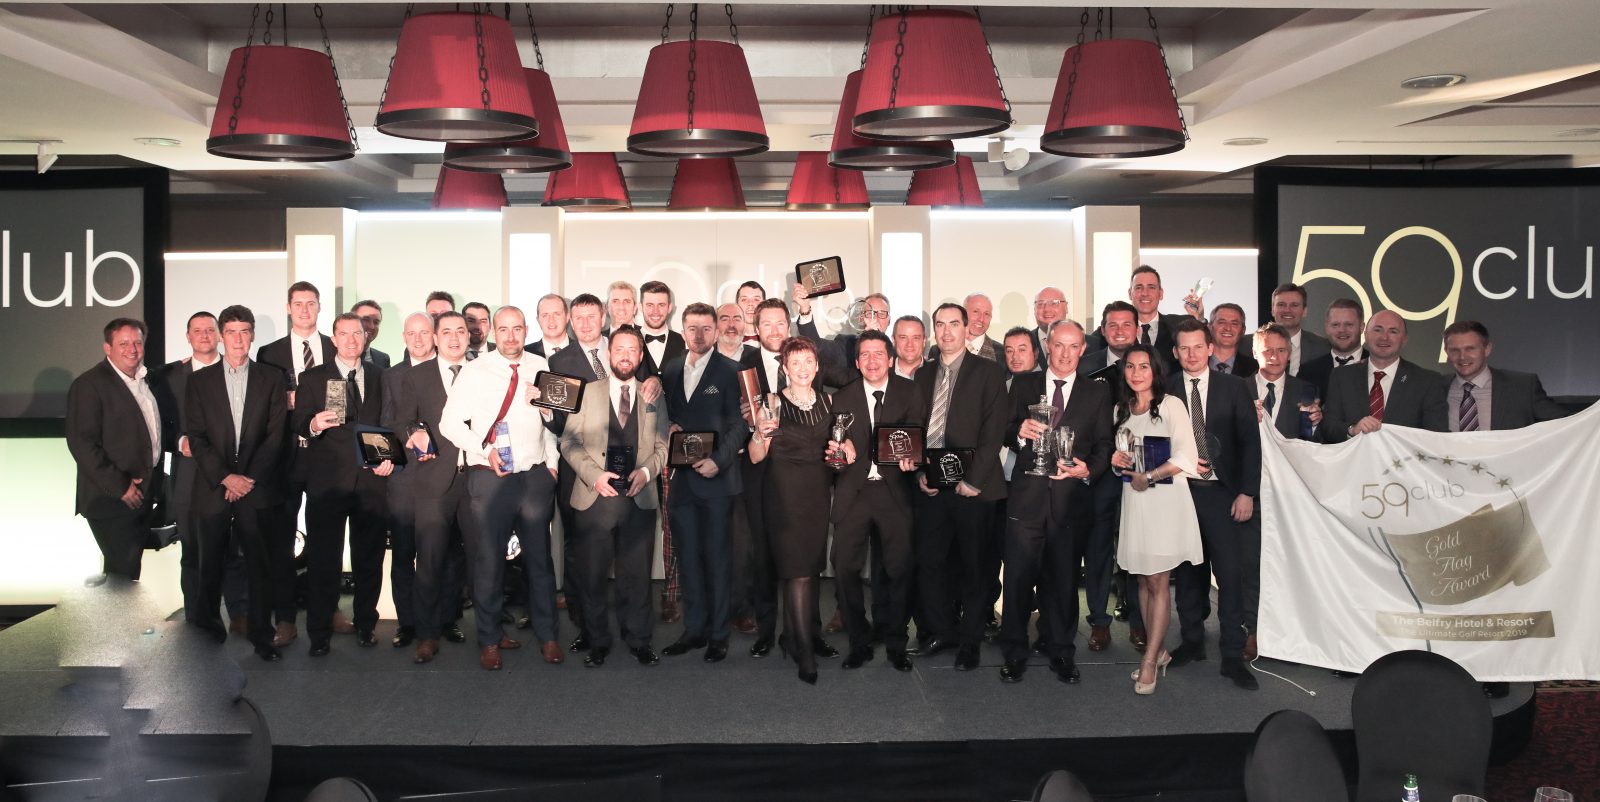 59club Annual Service Excellence Awards